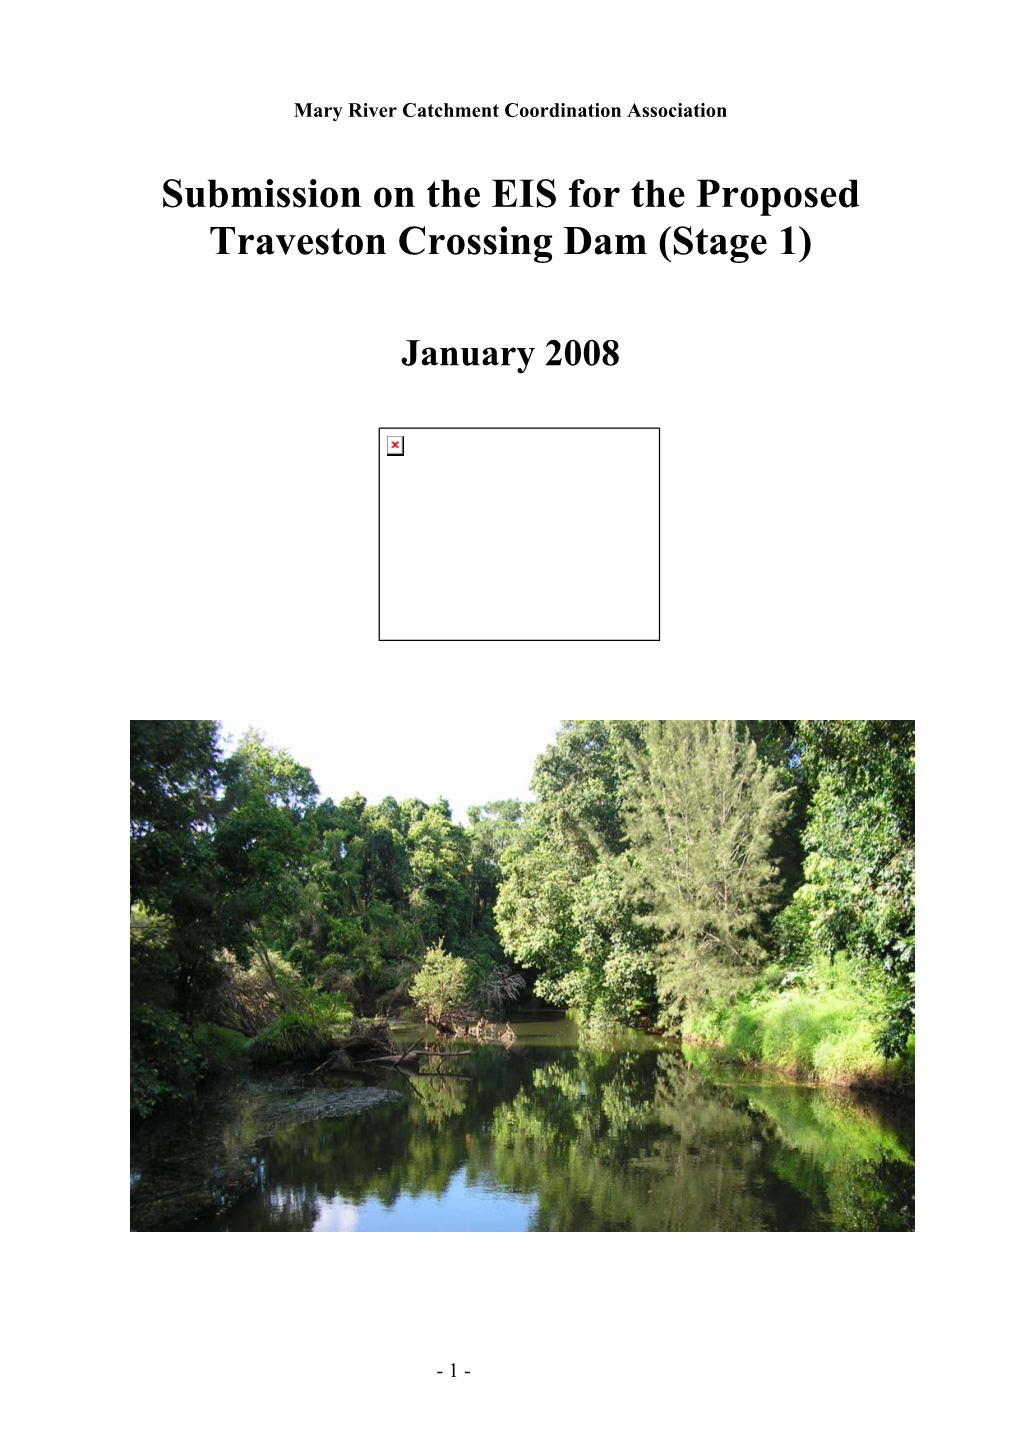 Submission on the EIS for the Proposed Traveston Crossing Dam (Stage 1)